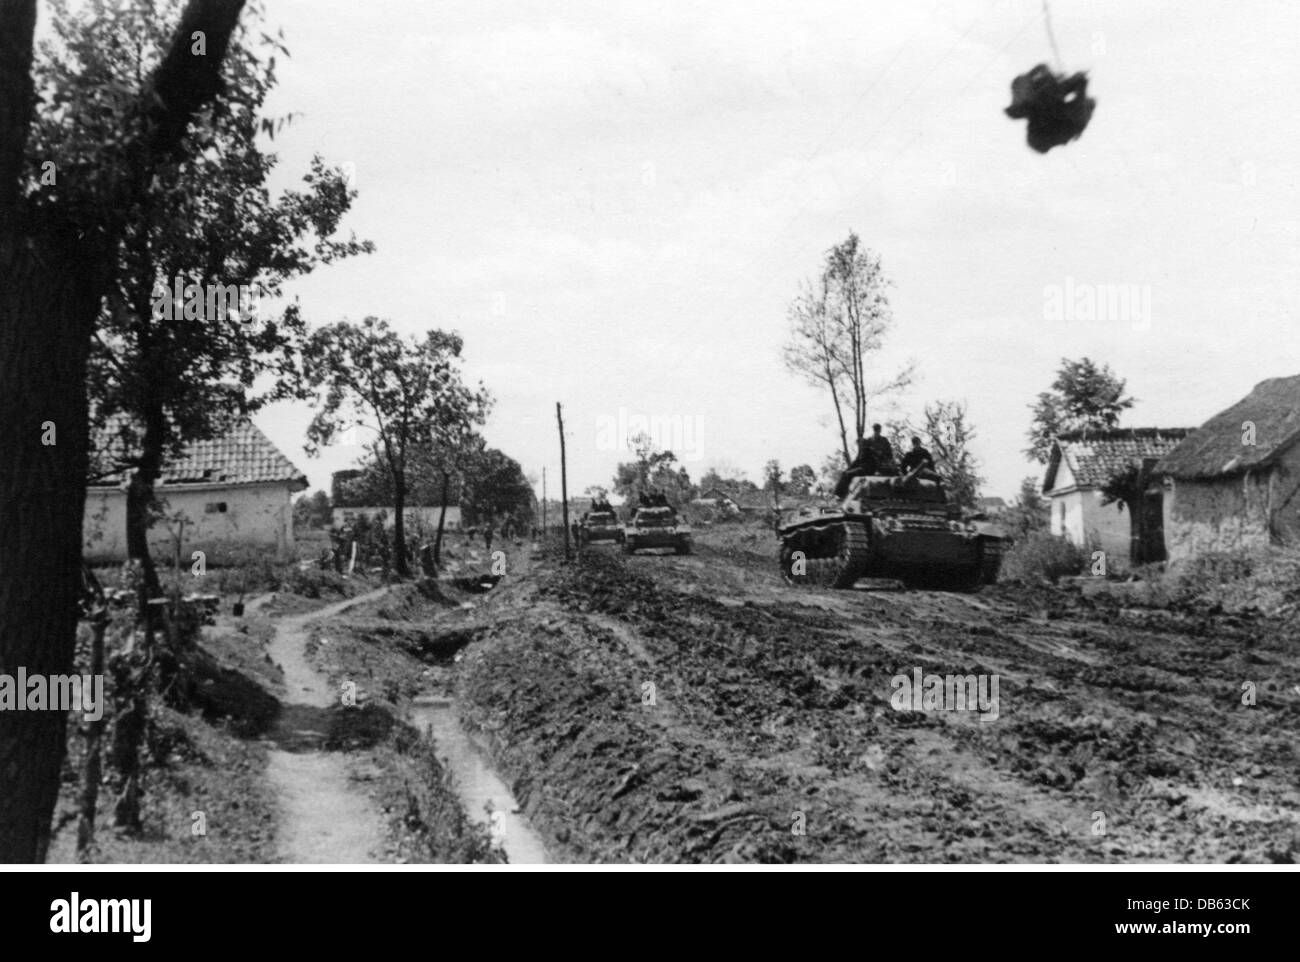 Second World War / WWII, Soviet Union, summer 1941, German Panzer III tanks of Panzer Group Kleist (1st Panzer Army), Army Group South, advancing on a muddy road in the Ukraine, Additional-Rights-Clearences-Not Available Stock Photo